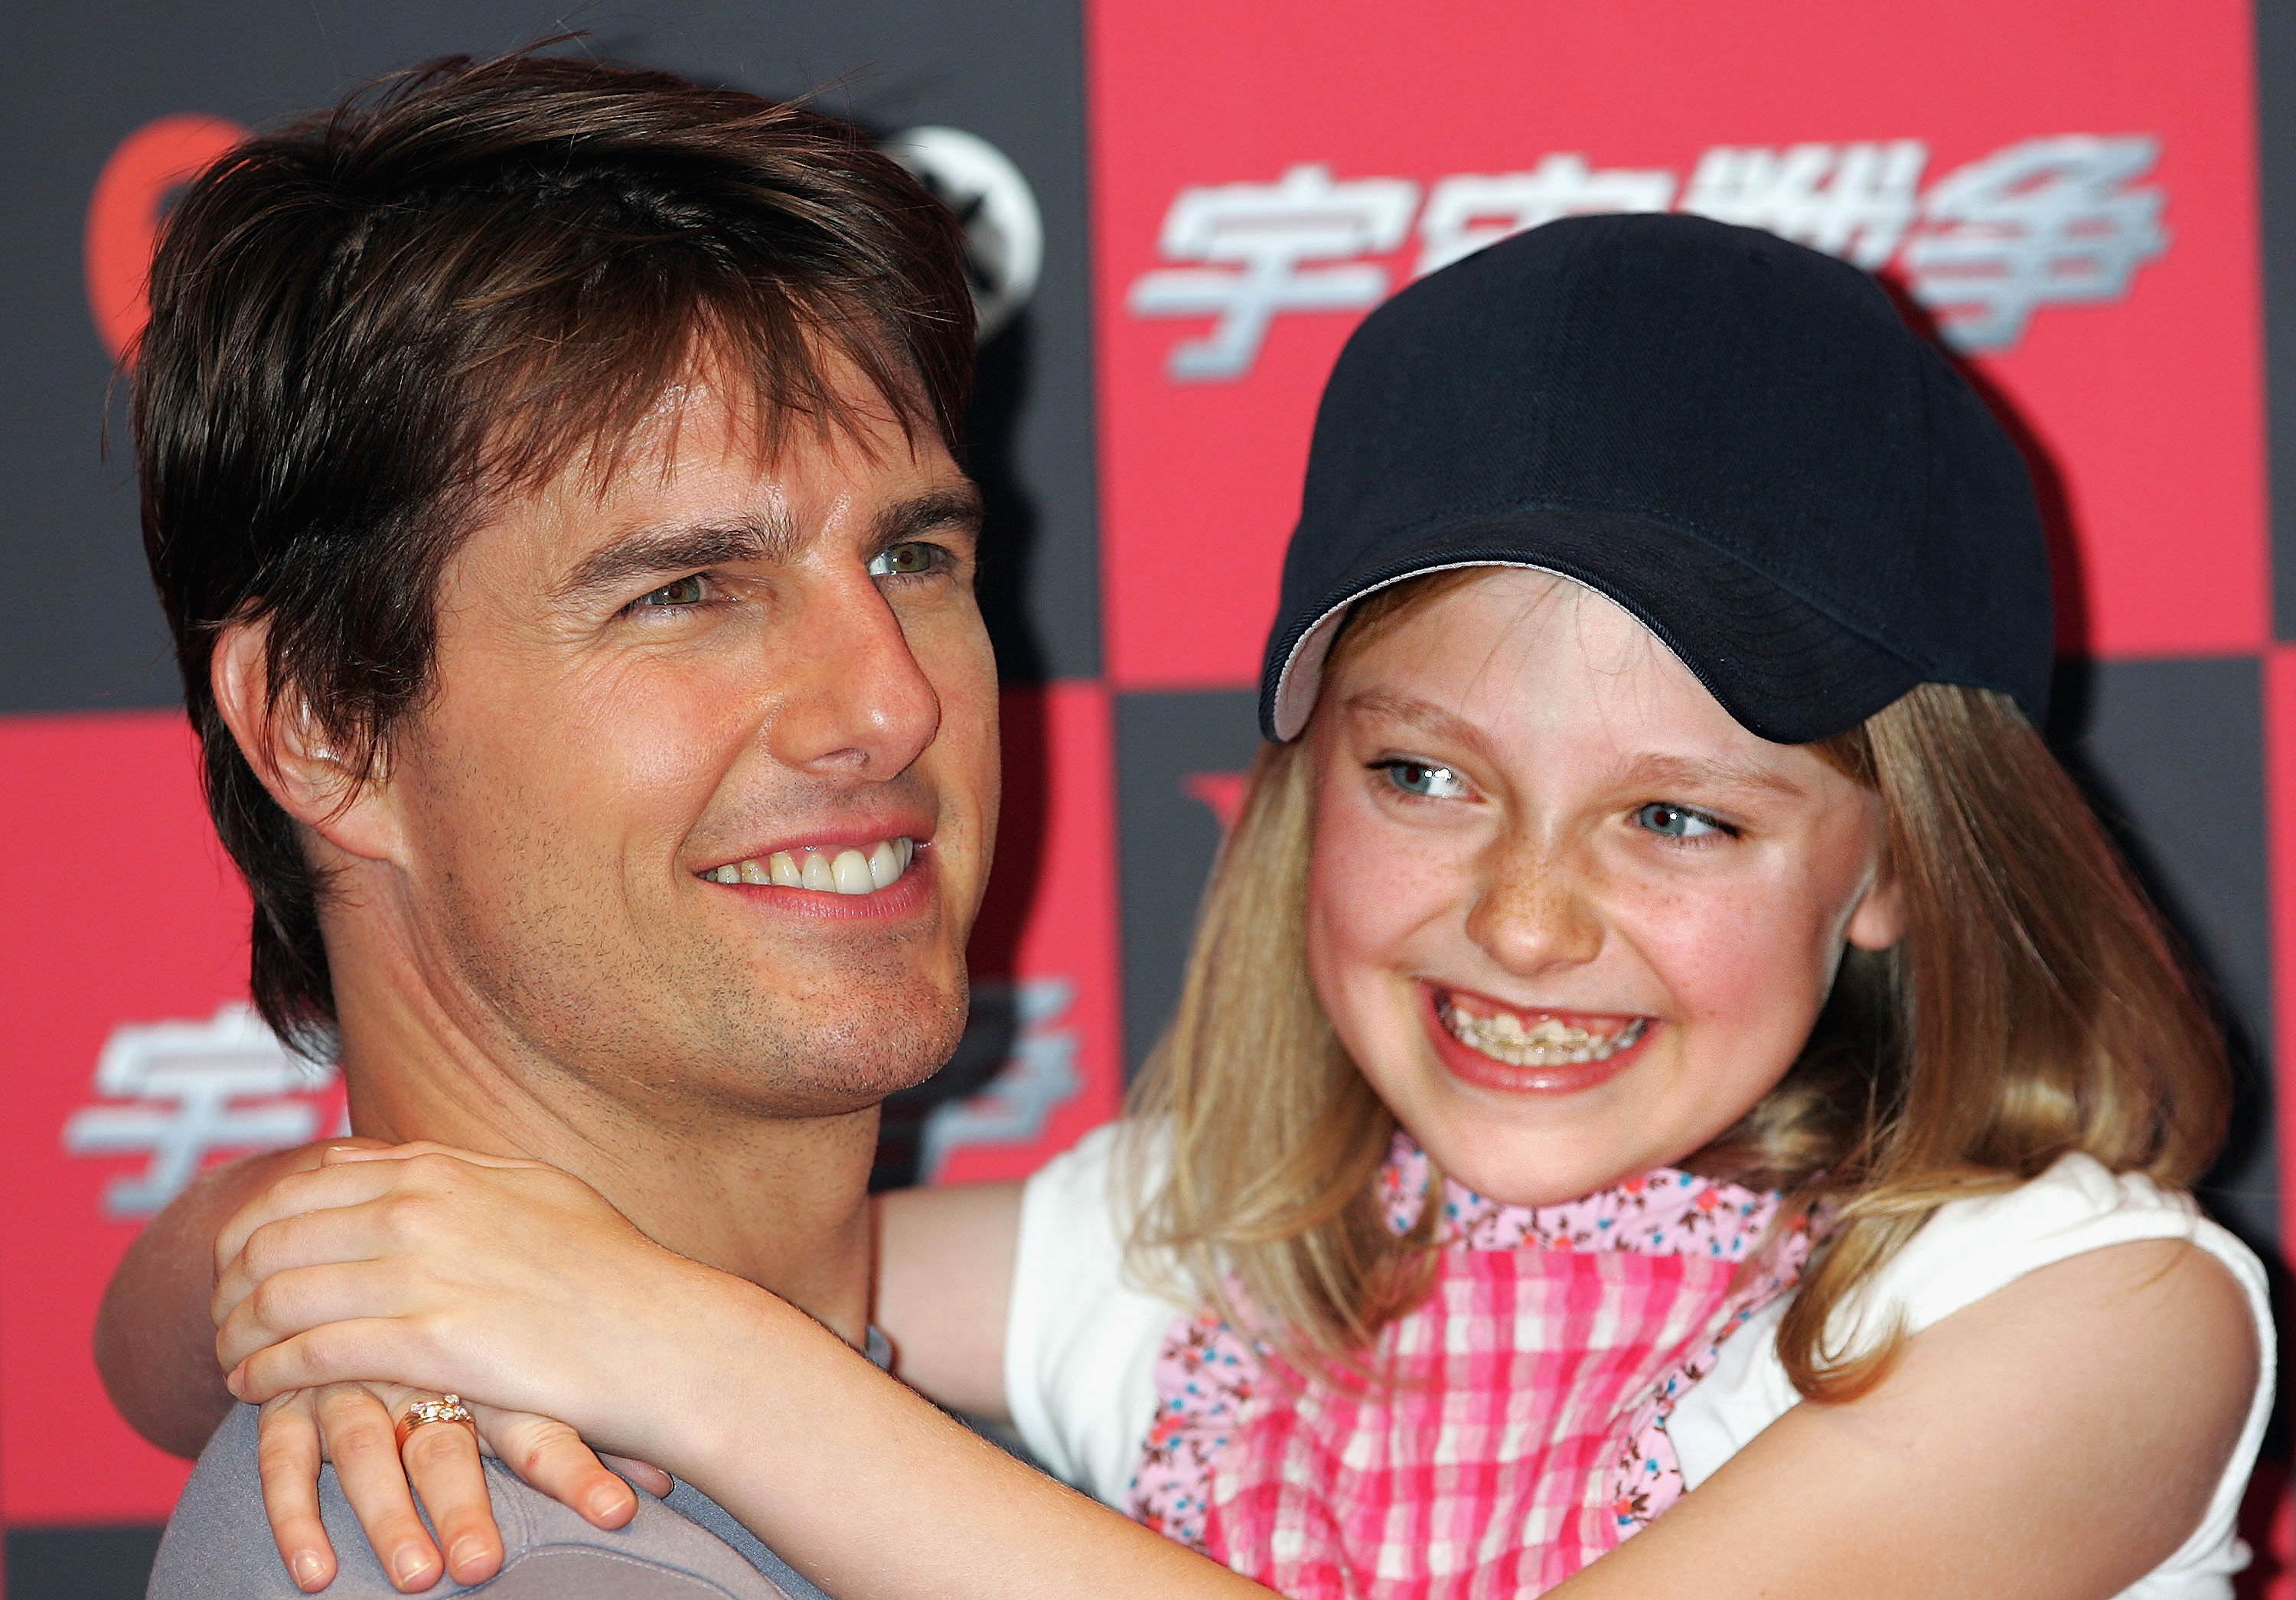 Tom Cruise and Dakota Fanning attend a photo call to promote "War of the Worlds" on June 13, 2005 in Tokyo, Japan | Source: Getty Images